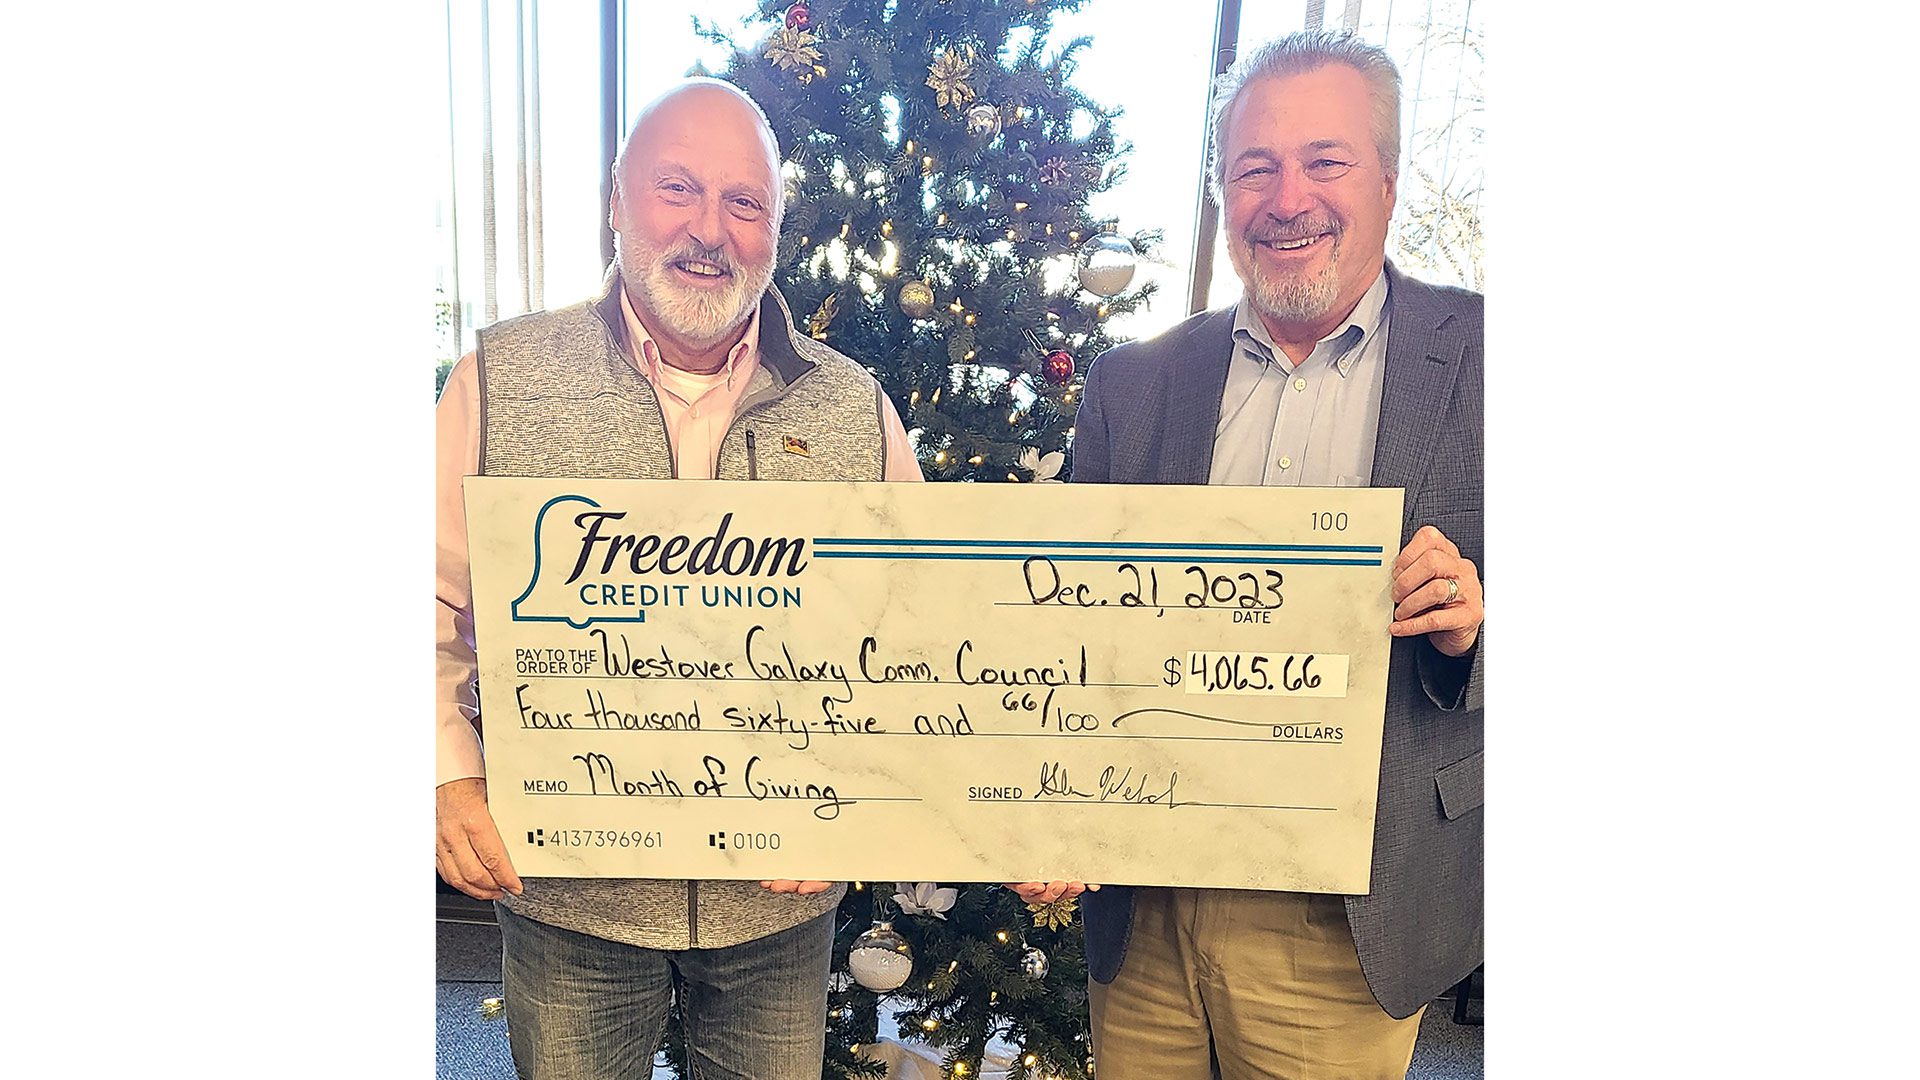 Pictured: John Beaulieu (left), president of Westover Galaxy Community Council, and Glenn Welch, President and CEO of Freedom Credit Union. (Photo by Market Mentors)